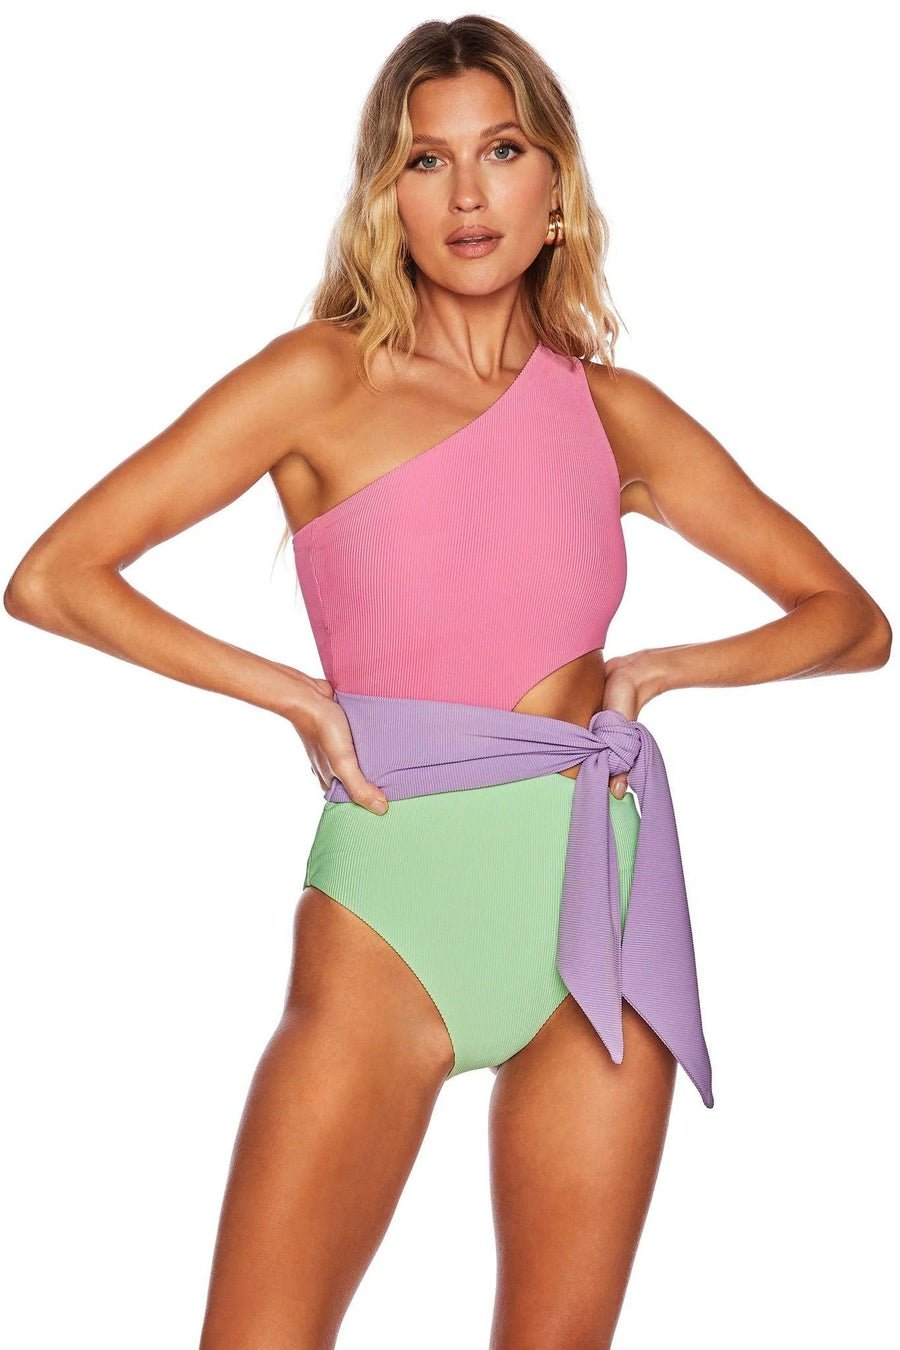 Shop Beach Riot Carlie One Piece Pretty Pastels Swimsuit - Premium Swimsuit from Beach Riot Online now at Spoiled Brat 